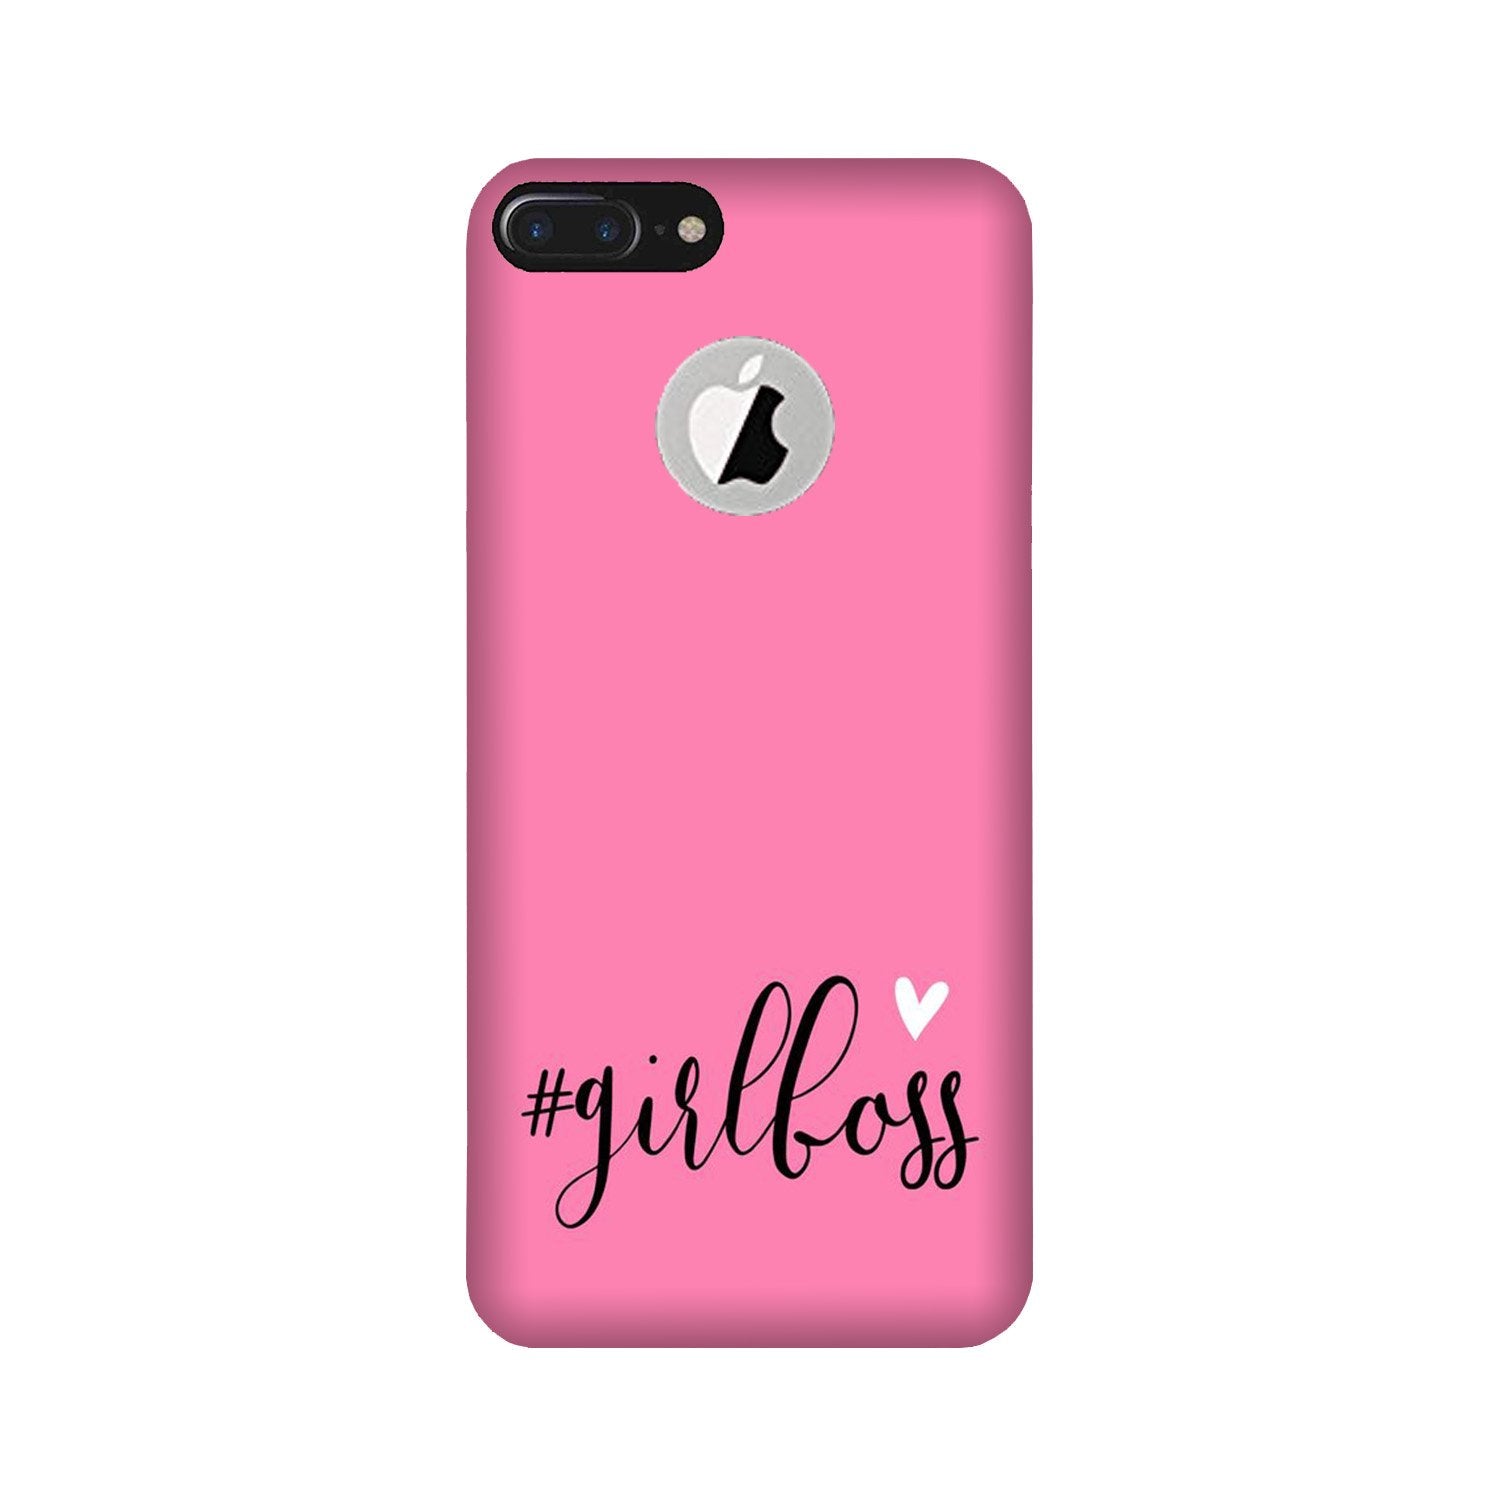 Girl Boss Pink Case for iPhone 7 Plus logo cut (Design No. 269)